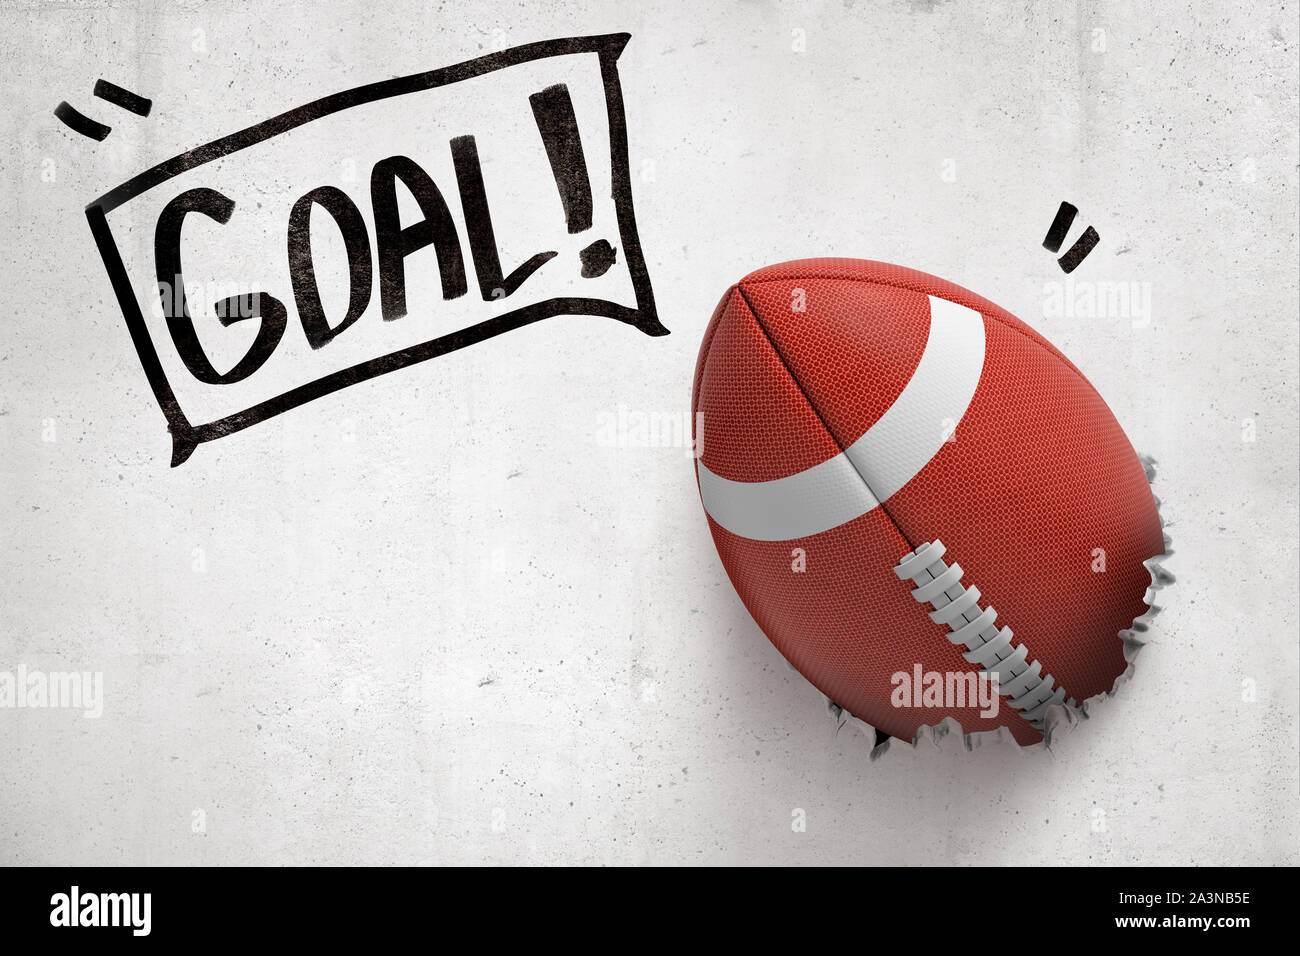 Download 3d Rendering Of American Football Ball Breaking White Wall With Goal Sign Stock Photo Alamy